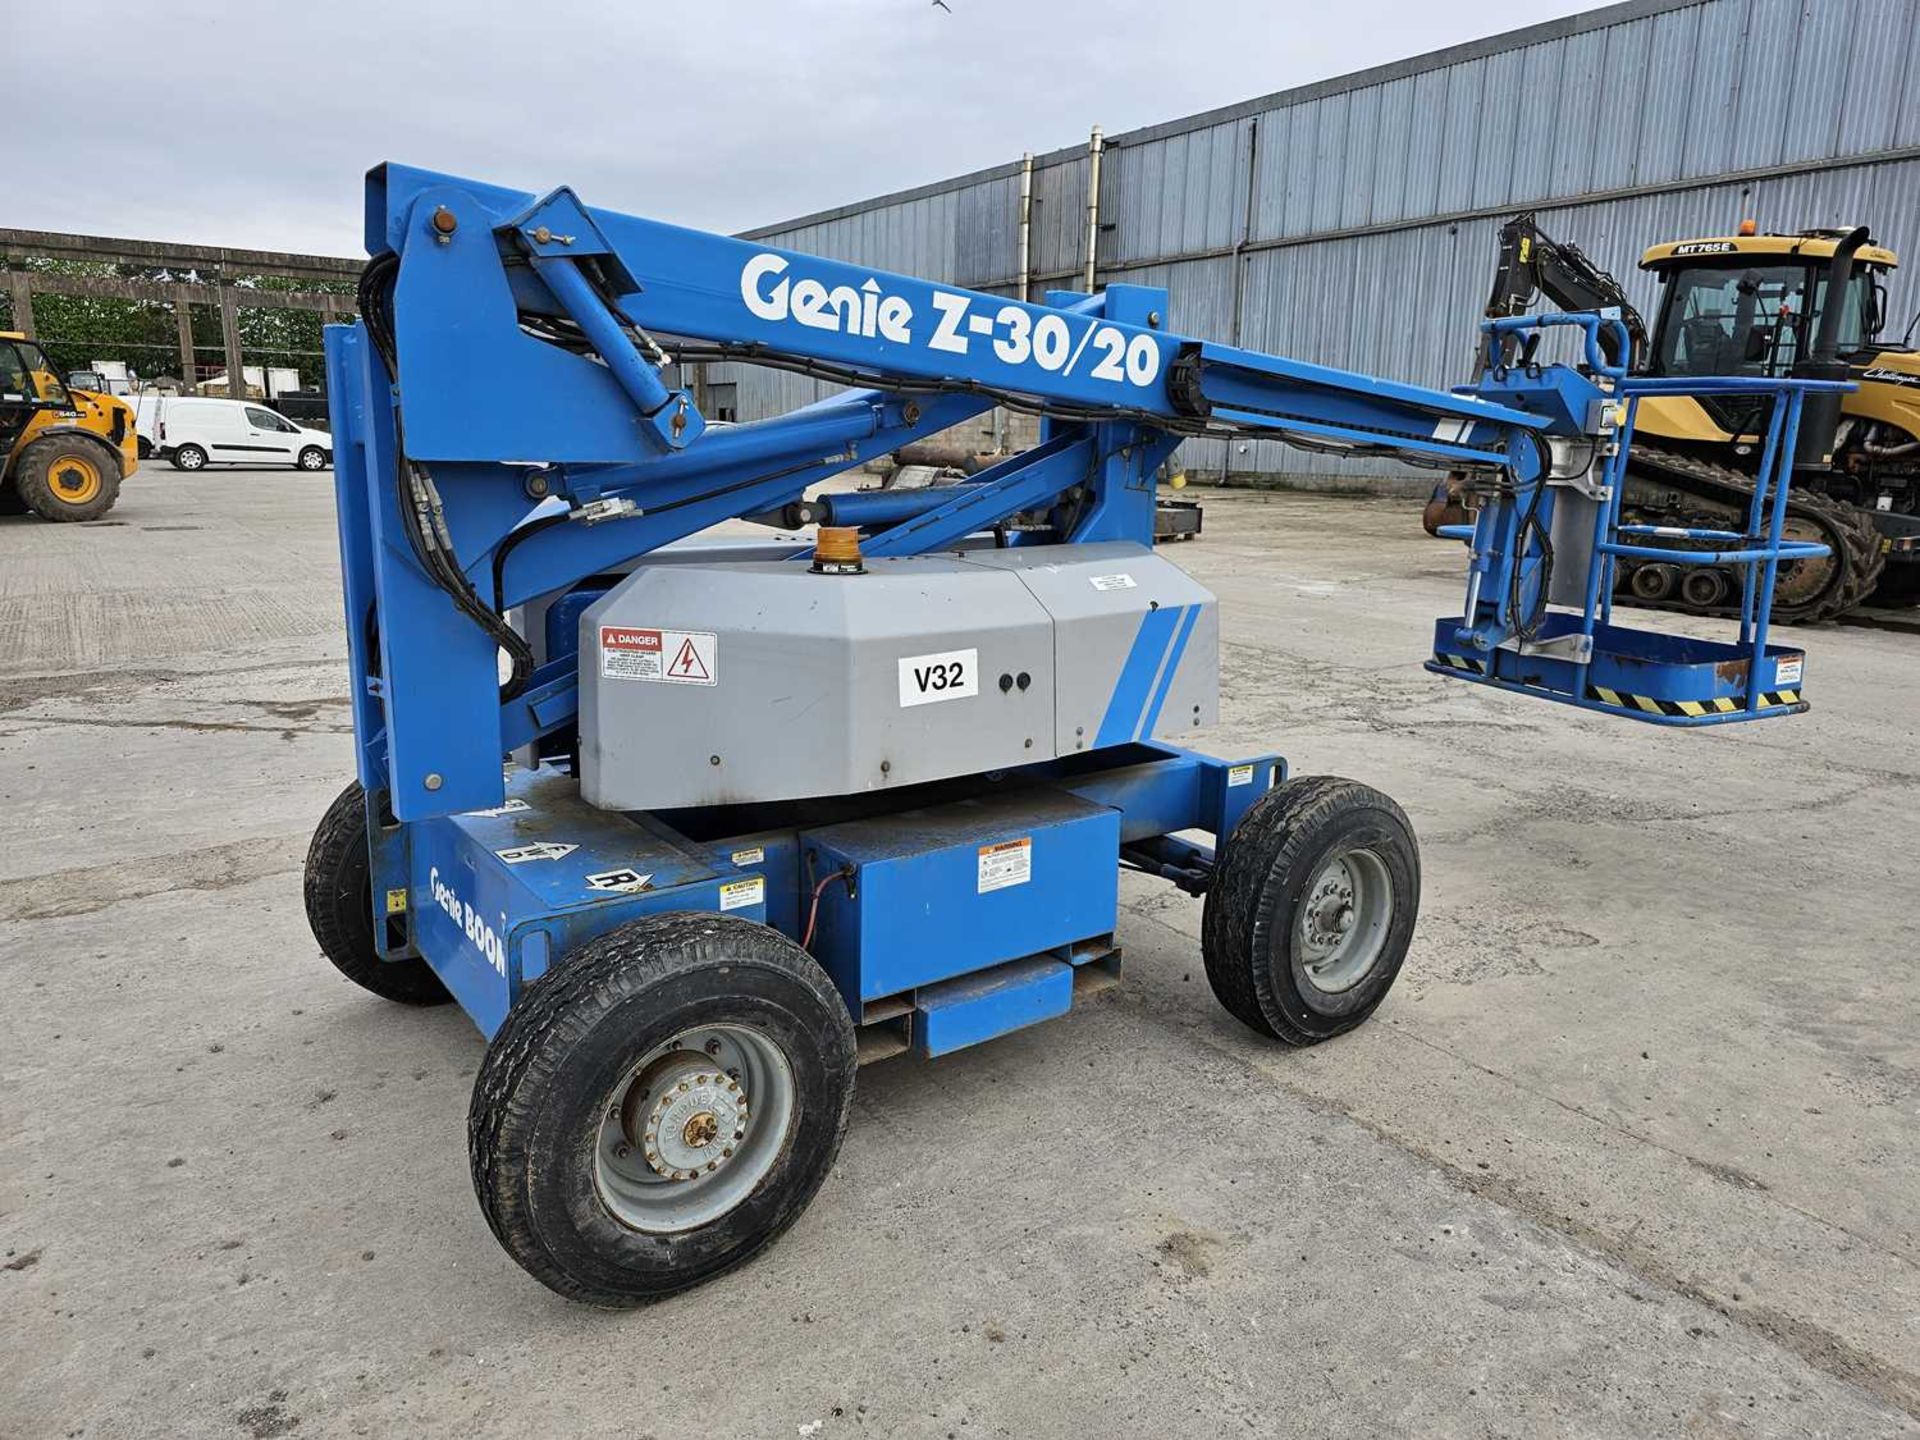 Genie Z30/20HD Wheeled Articulated Electric Scissor Lift Access Platform - Image 6 of 17